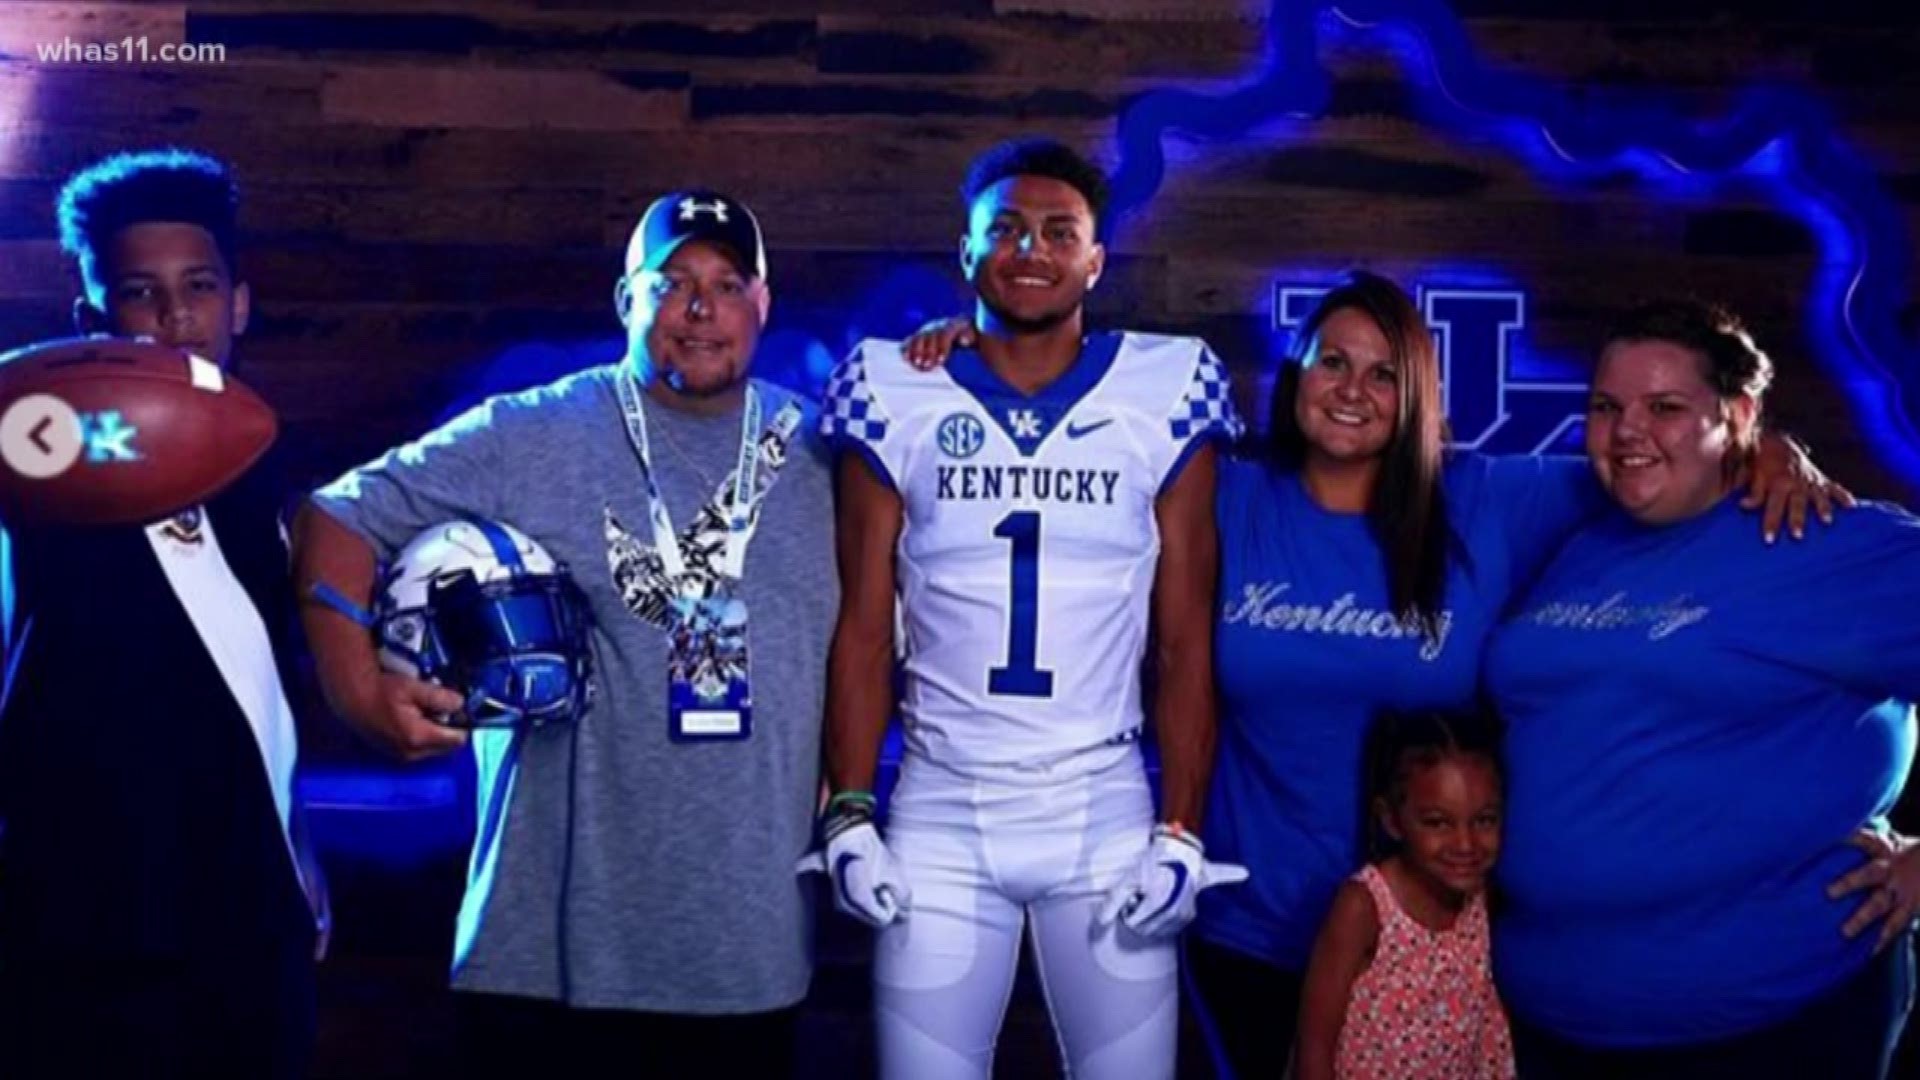 UK lands more commits from Louisville | 0